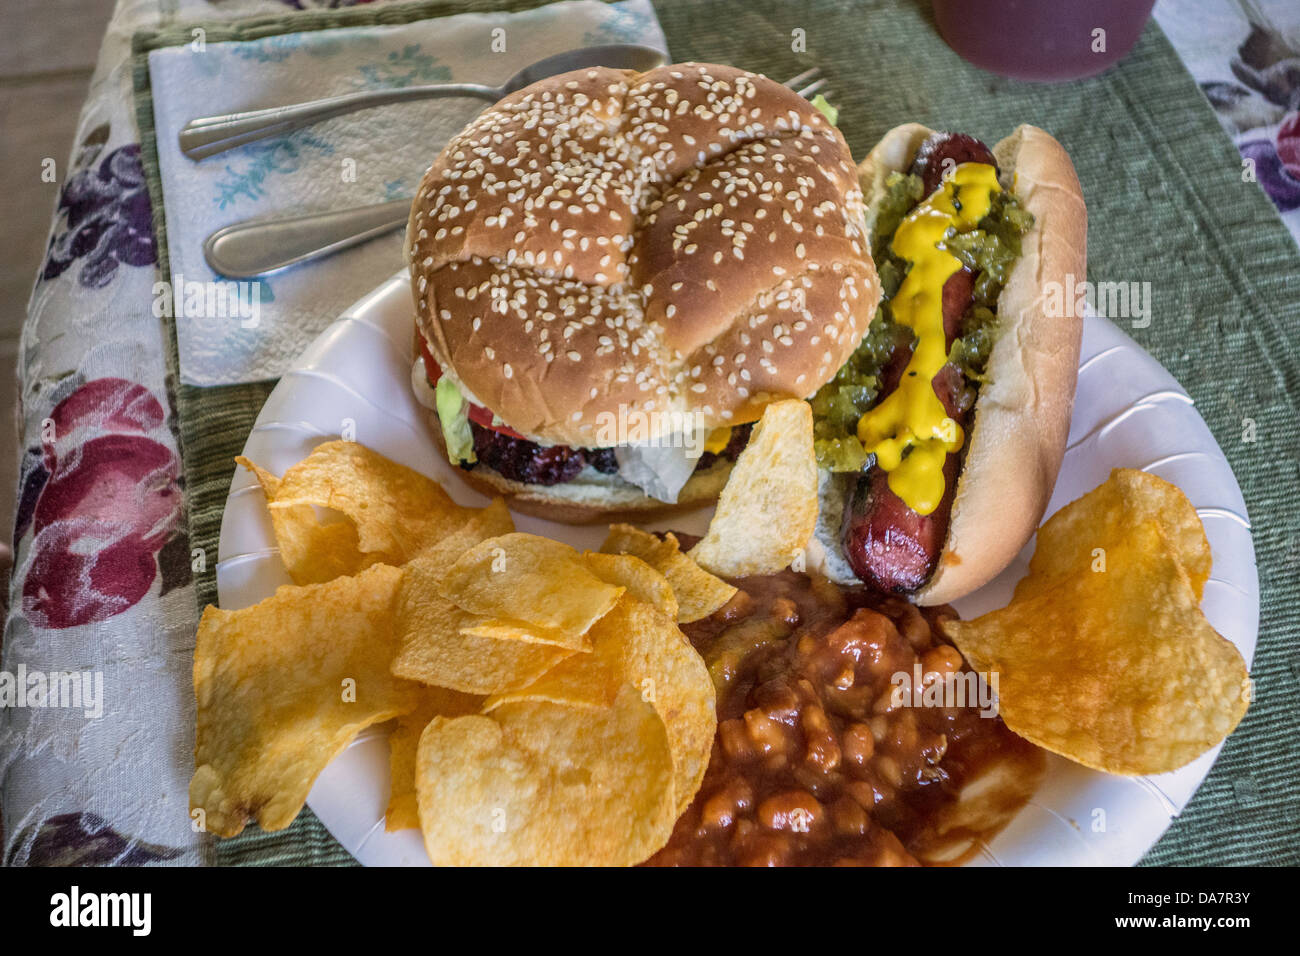 Barbeque hamburgers and hot dogs, cooked outdoors and eaten inside on paper plates. USA. Stock Photo